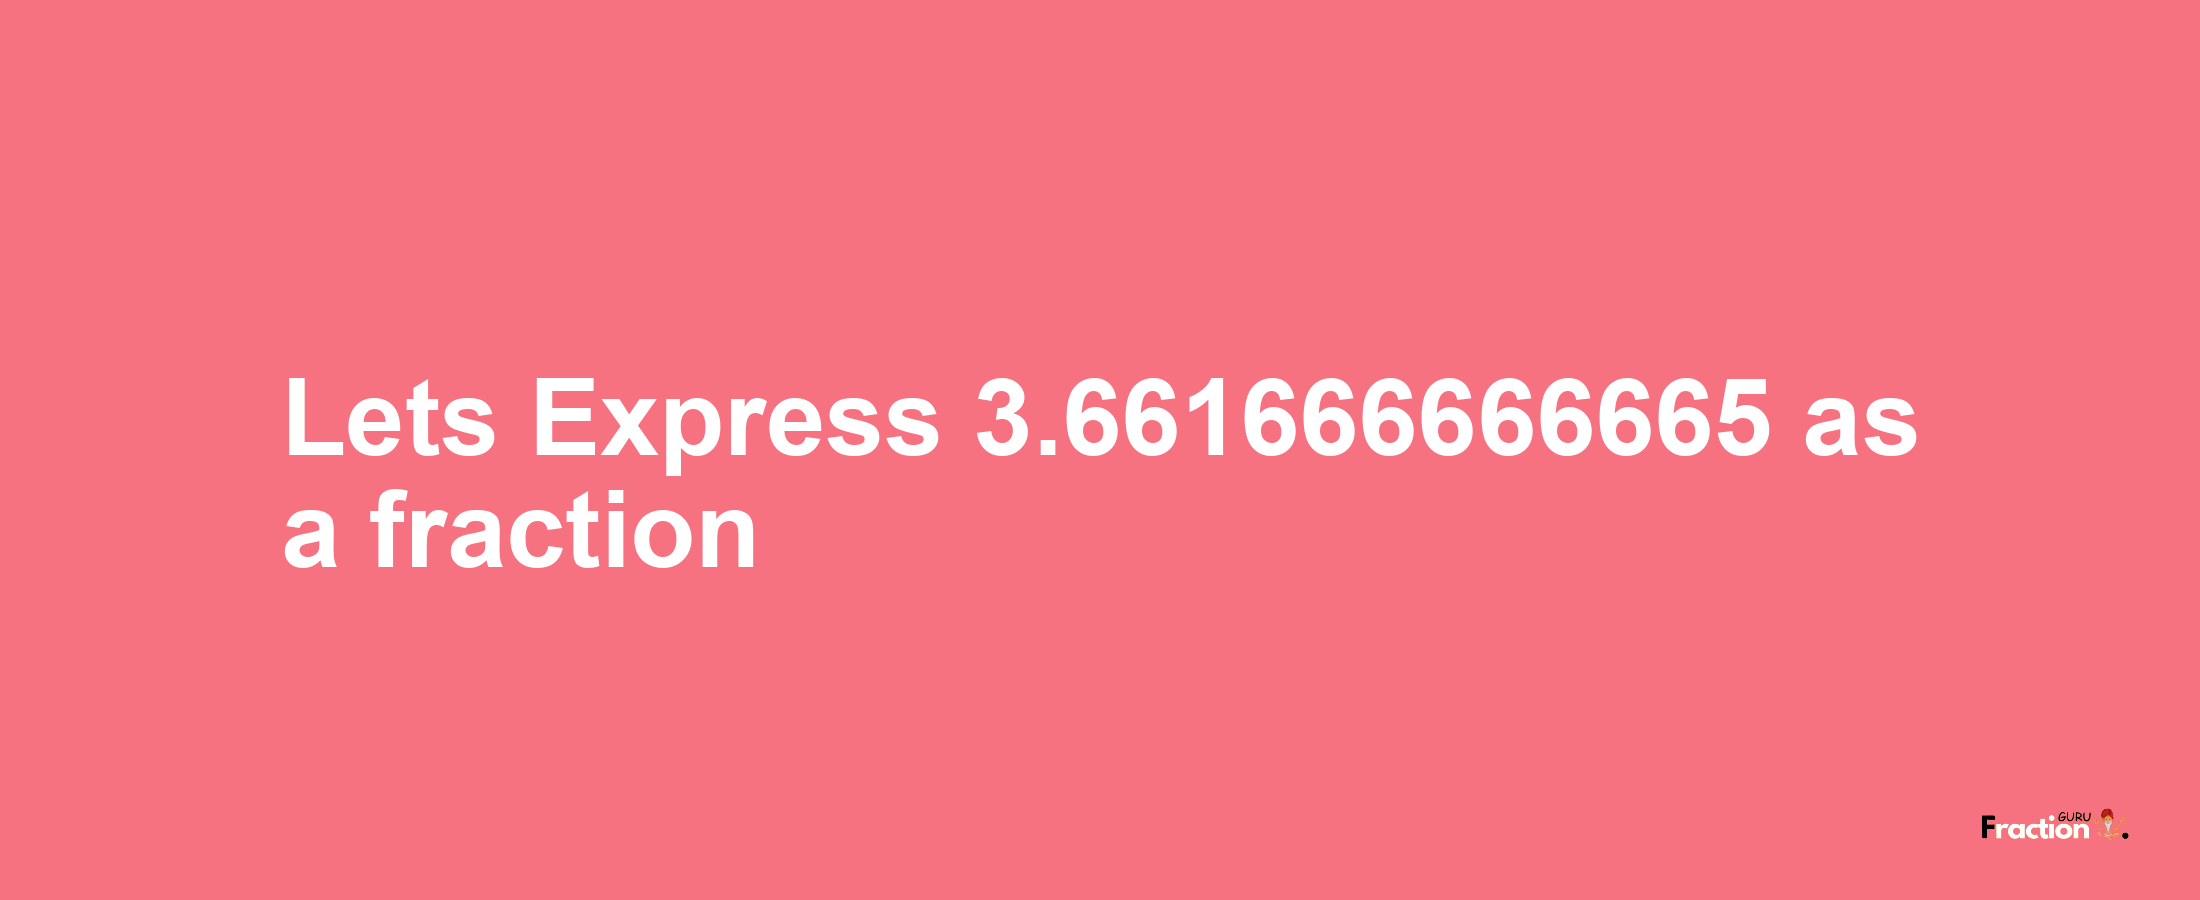 Lets Express 3.661666666665 as afraction